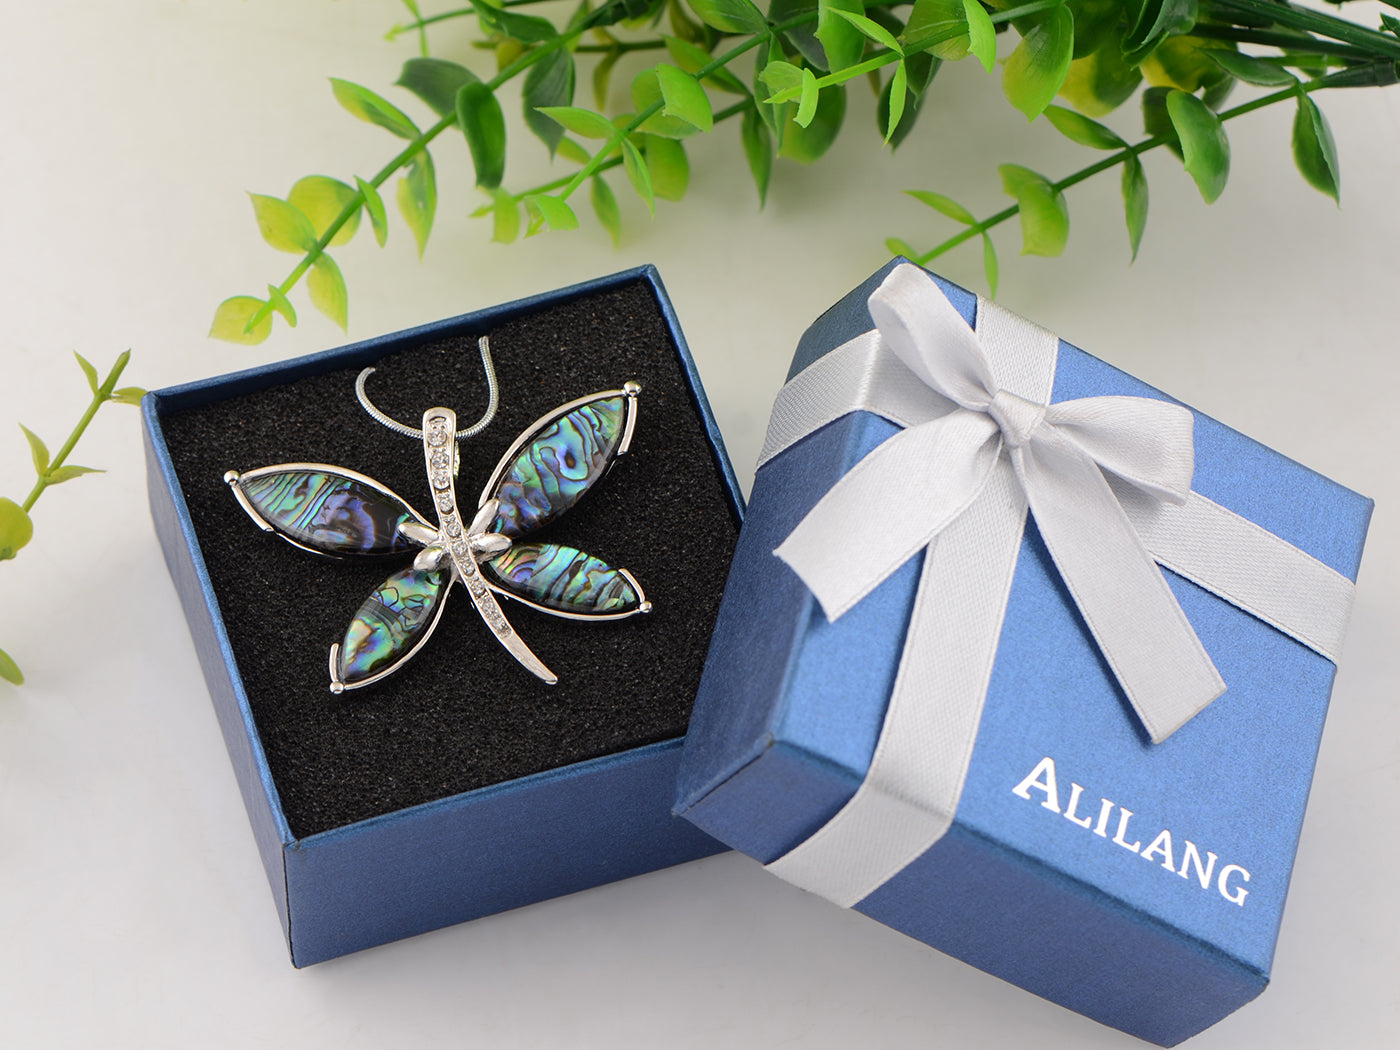 Abalone Colored Dragonfly Pendant Necklace